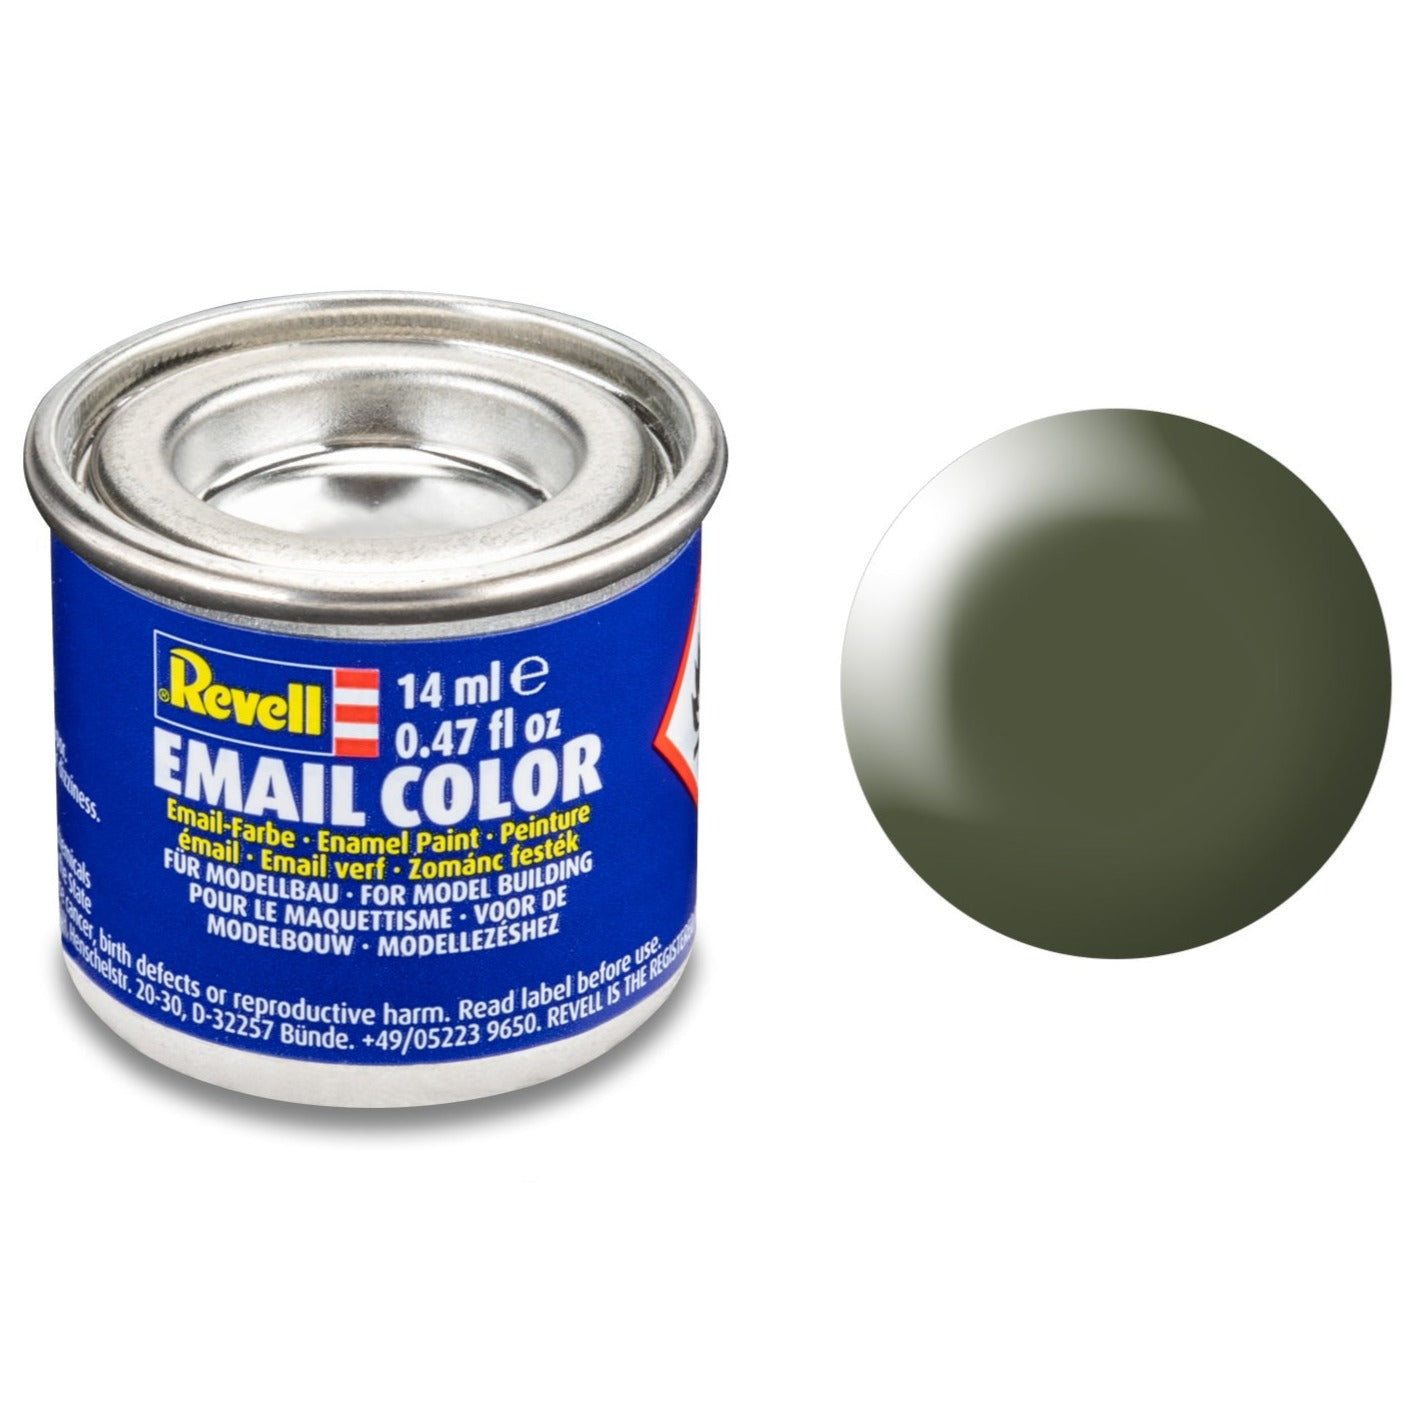 Revell Silk "Olive Green" (RAL 6003) Enamel Paint - 14ml - 32361 - Loaded Dice Barry Vale of Glamorgan CF64 3HD